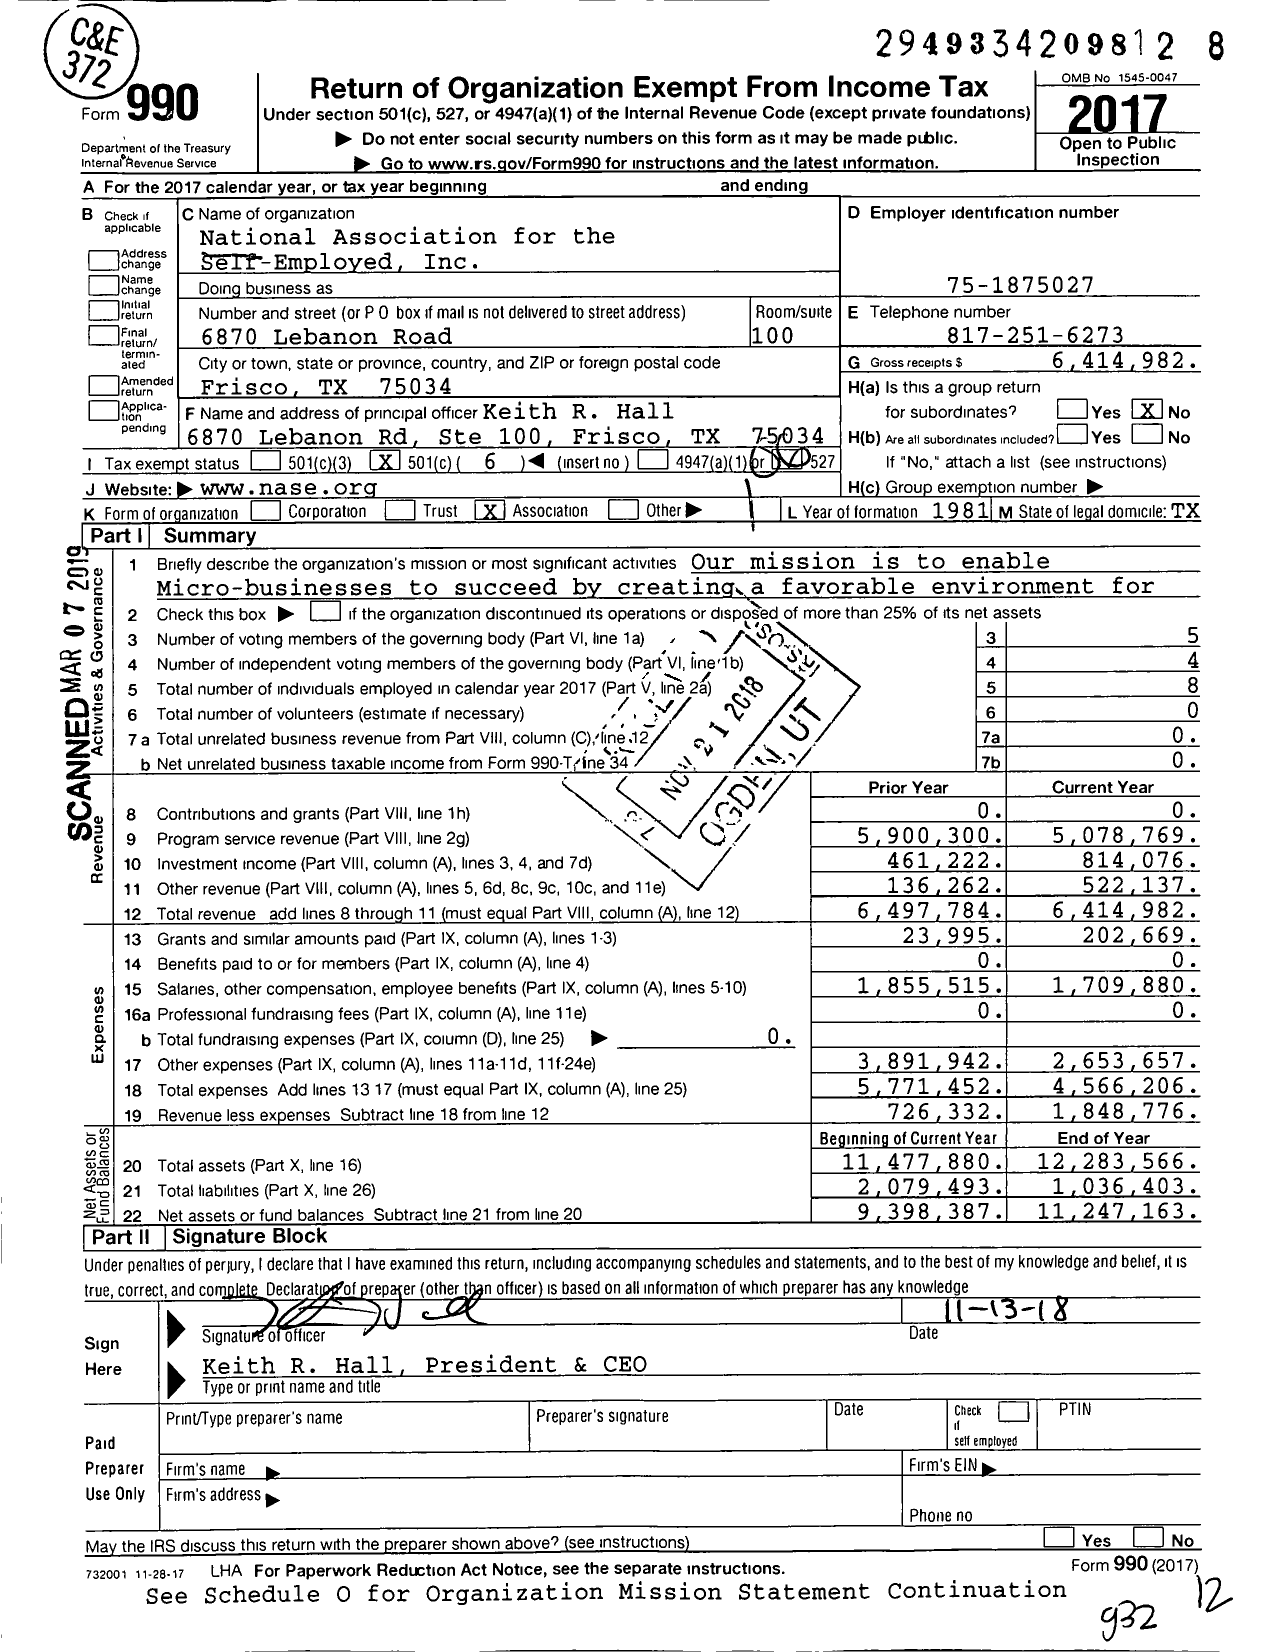 Image of first page of 2017 Form 990O for National Association for the Self-Employed